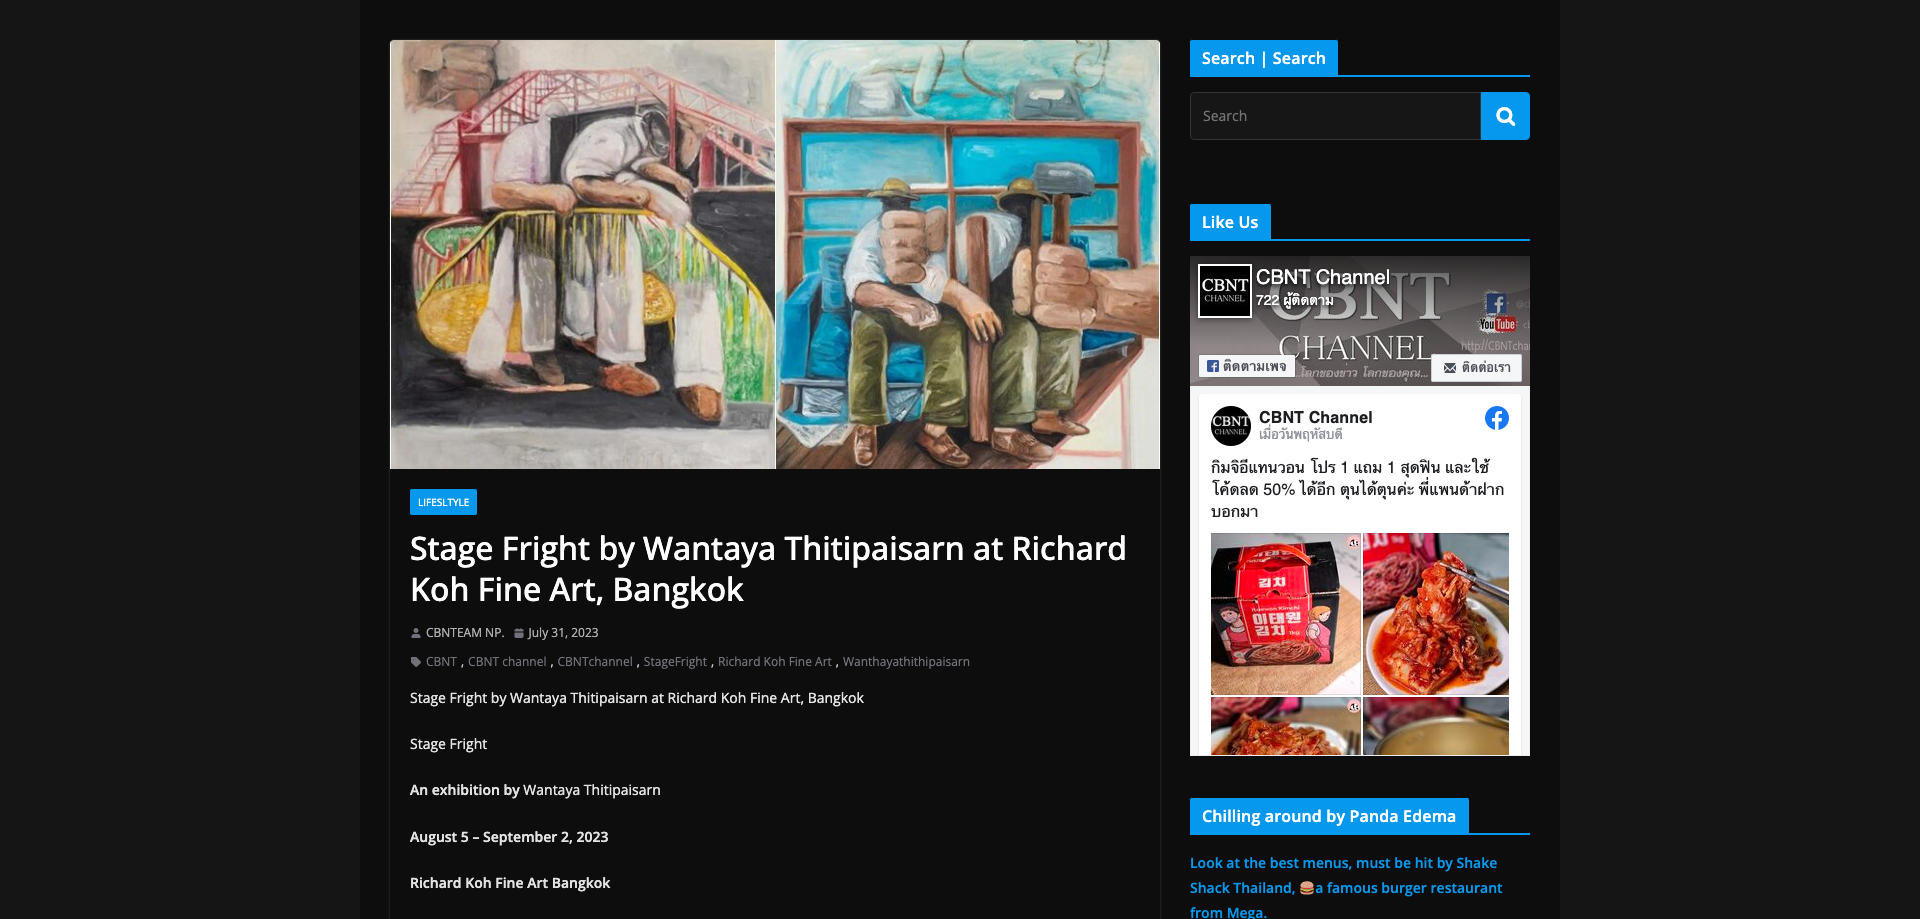 CBNT CHANNEL – Stage Fright exhibition by Wantaya Thitipaisan at Richard Koh Fine Art, Bangkok